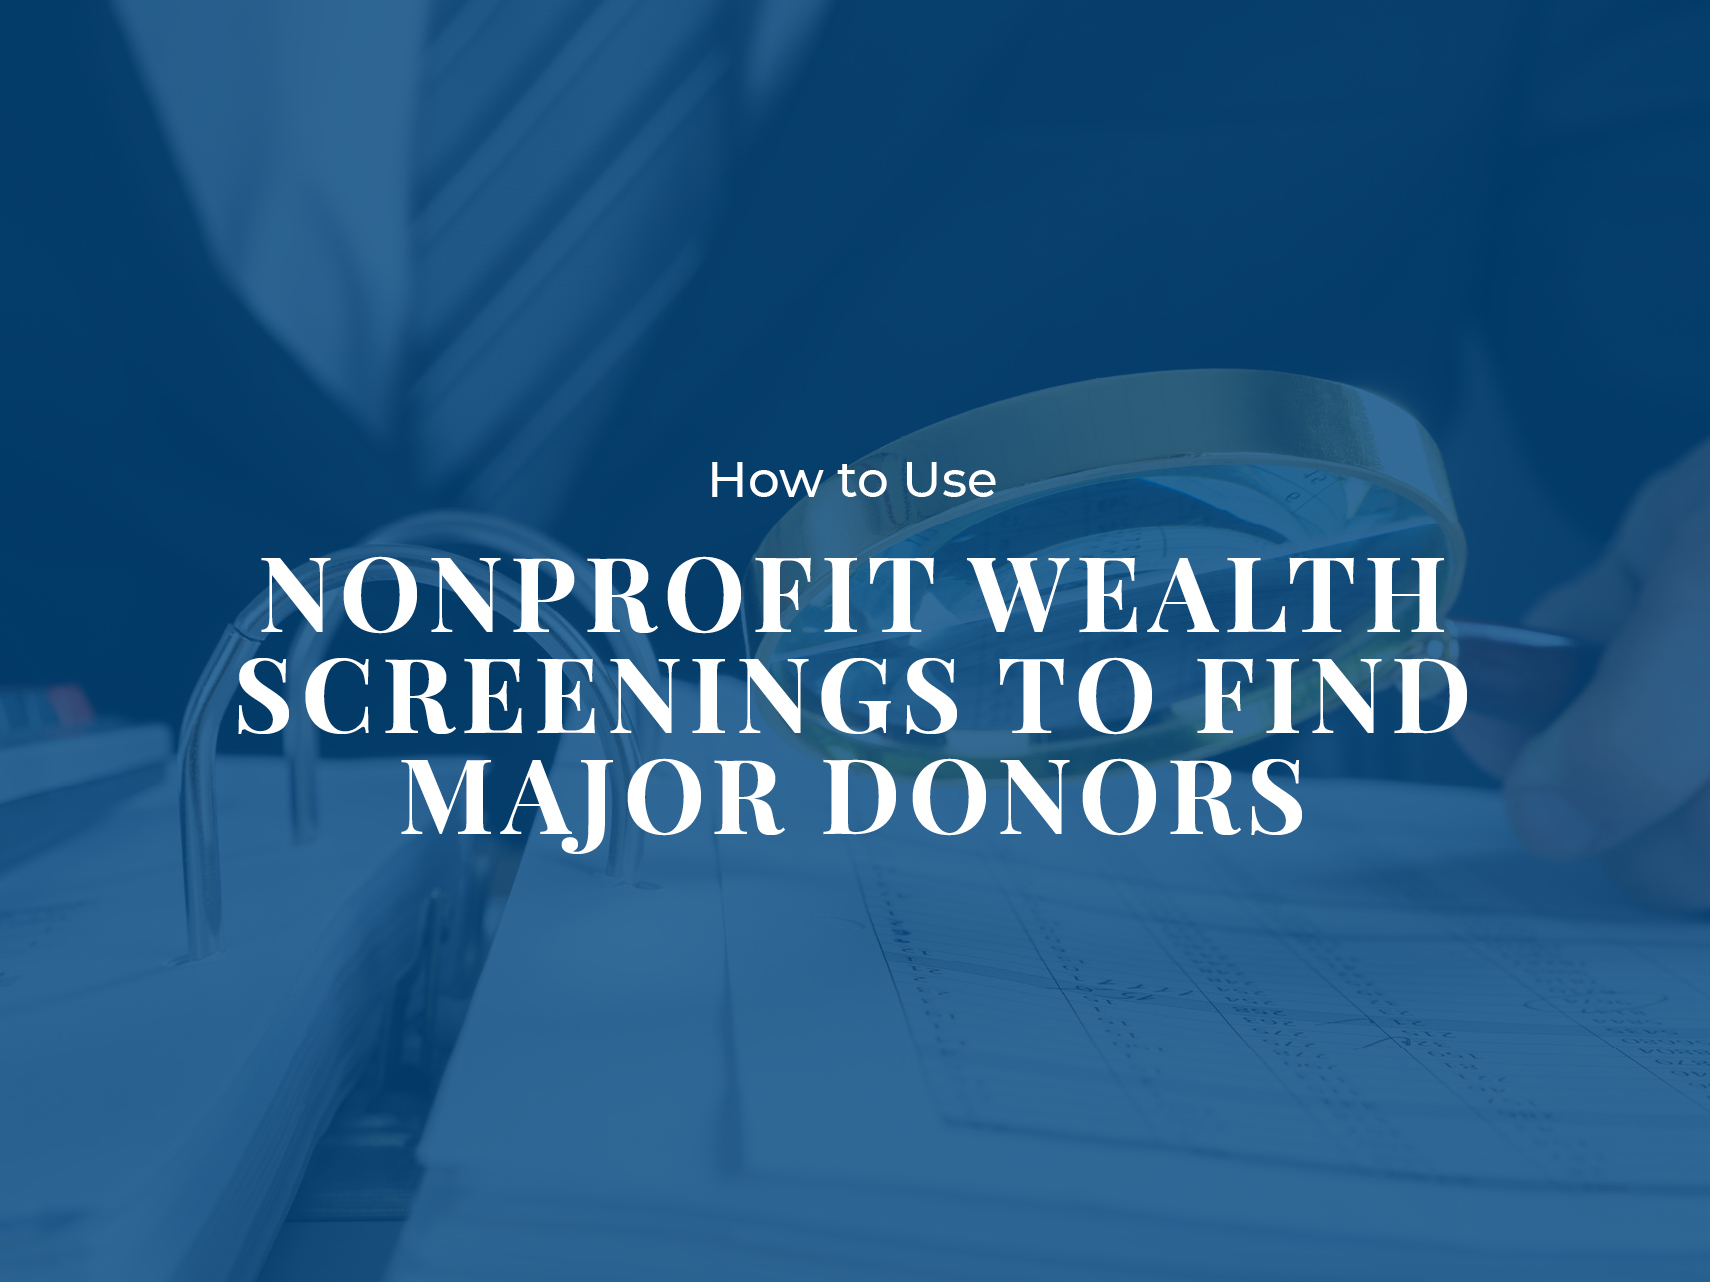 The article’s title, “How to Use Nonprofit Wealth Screenings to Find Major Donors,” overlaid atop someone holding a magnifying glass over a binder.